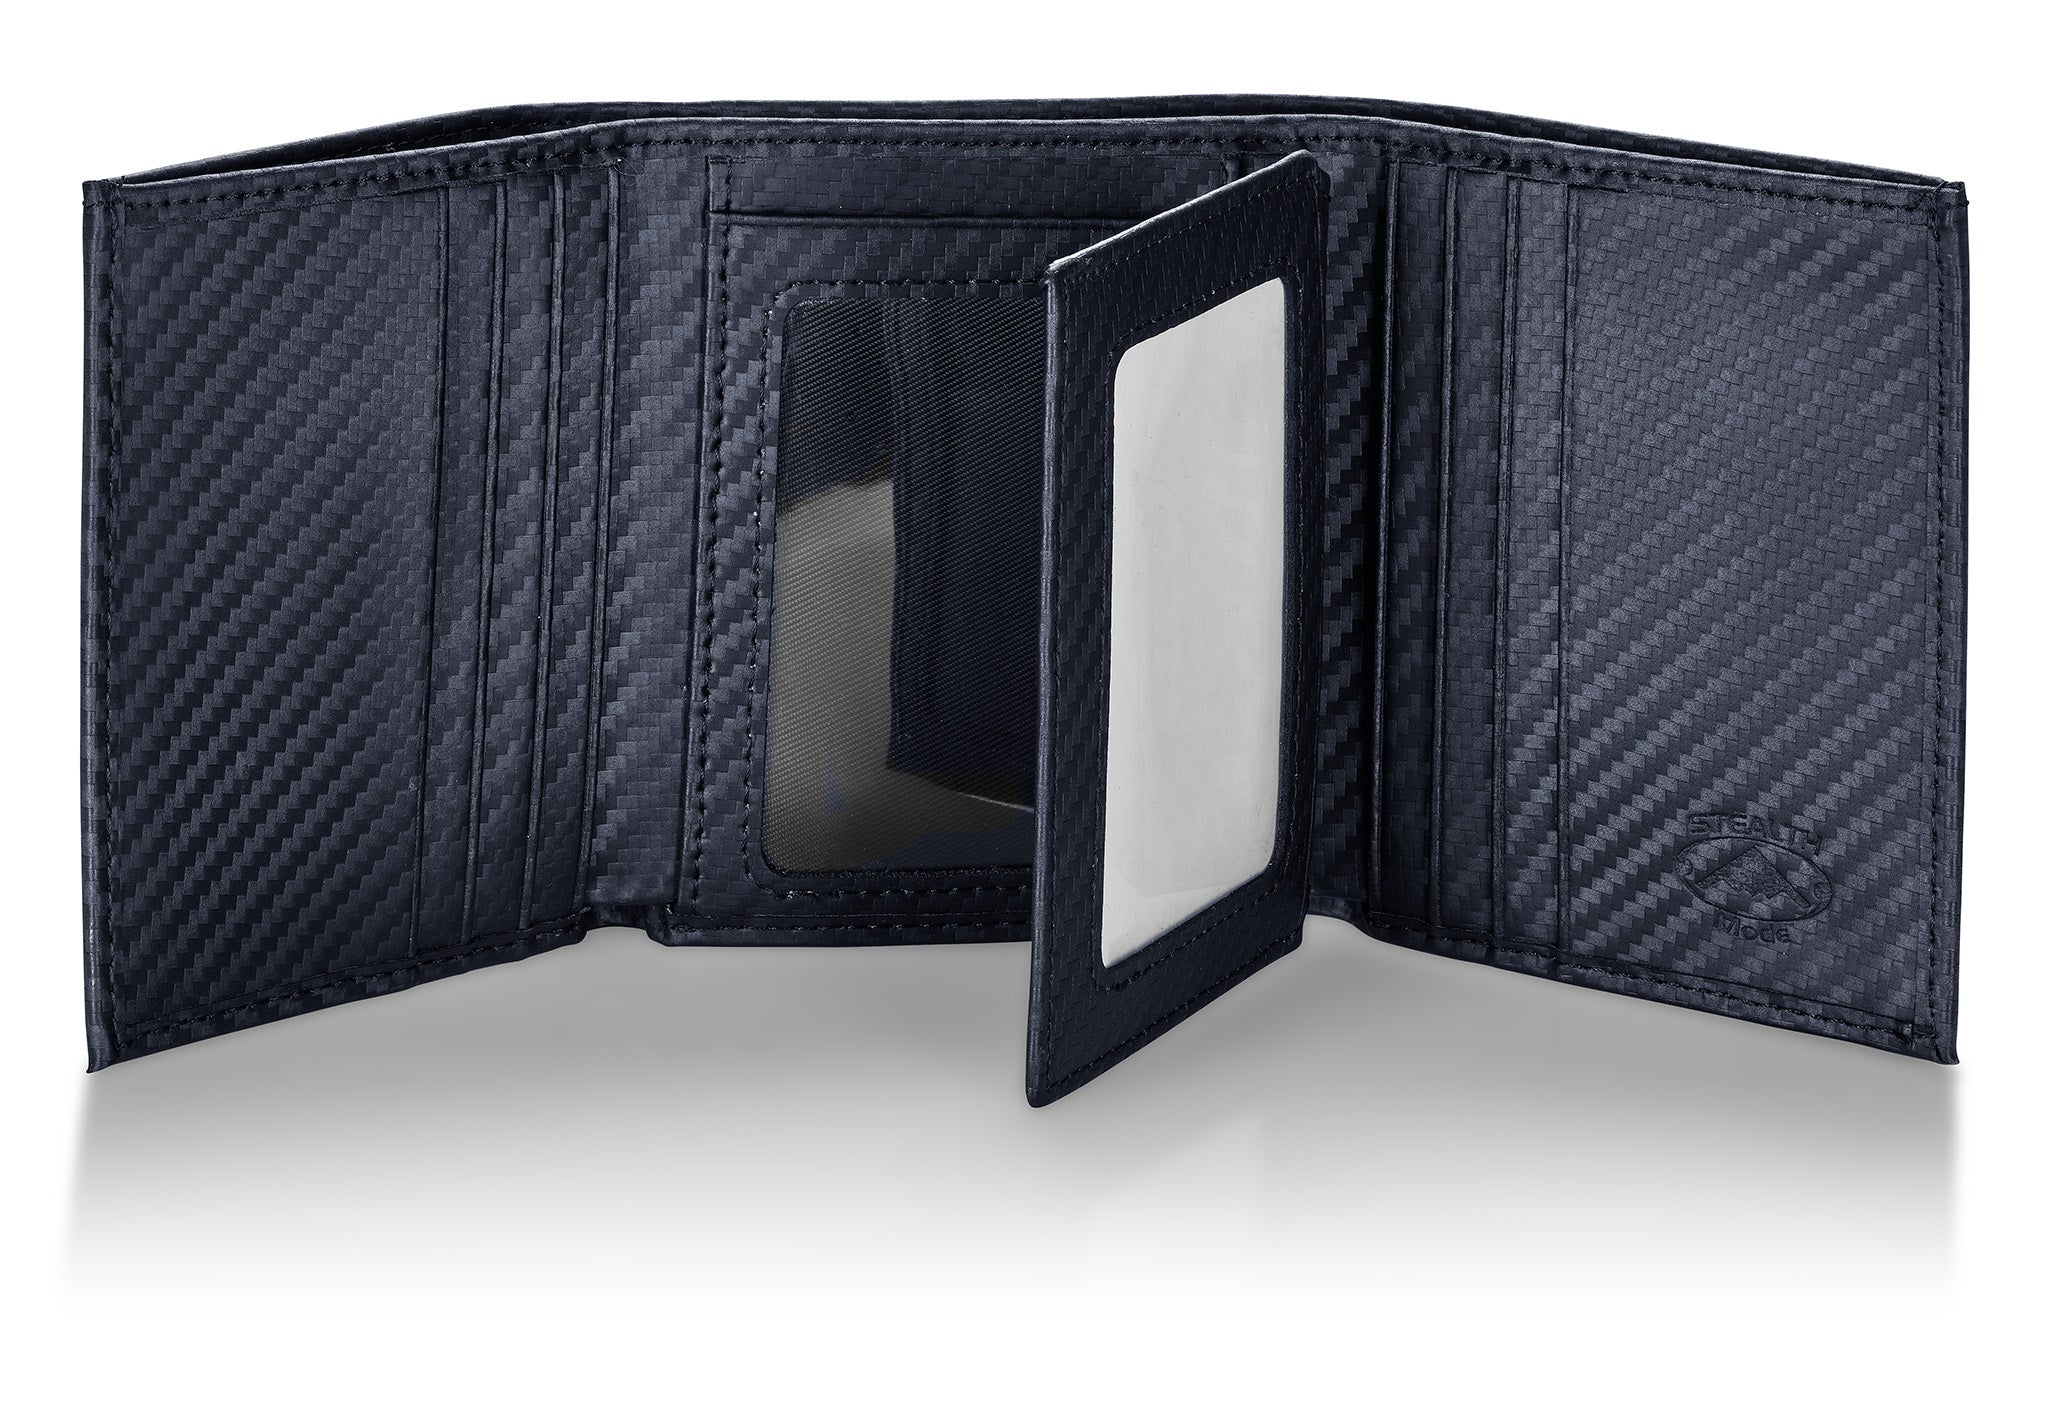 Carbon Fiber Trifold RFID Wallet For Men With Flip Out ID Holder